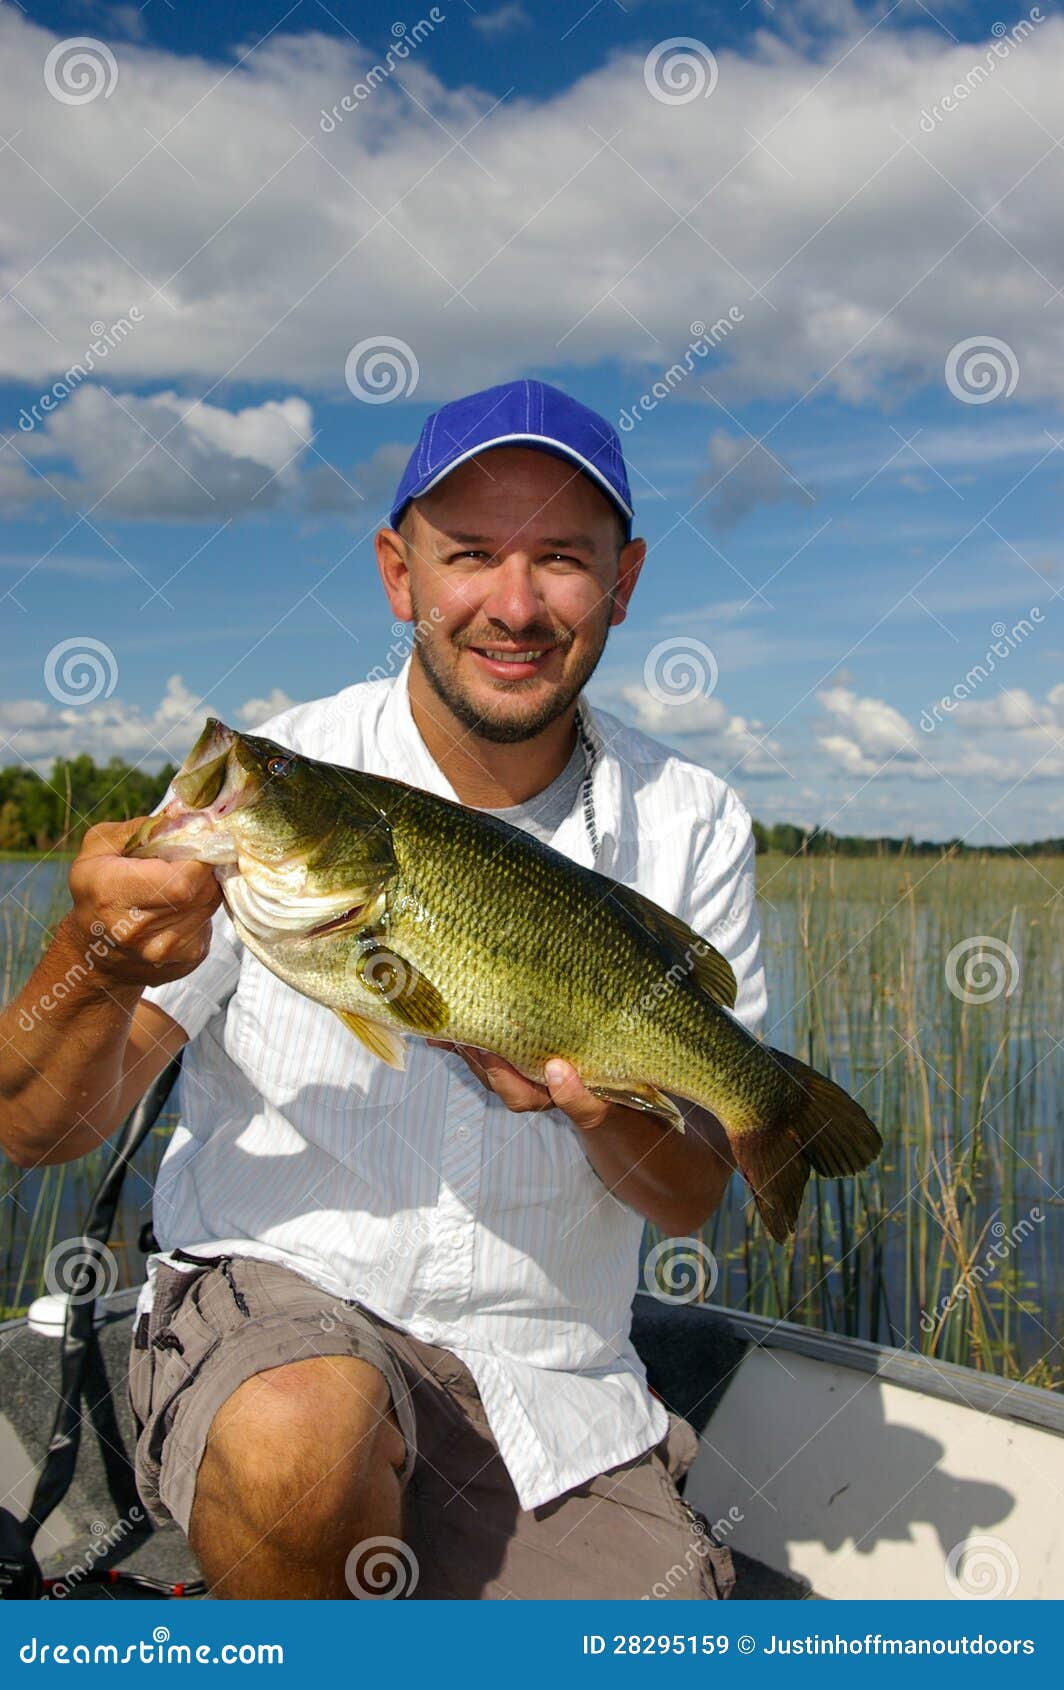 happy angler fishing for largemouth bass